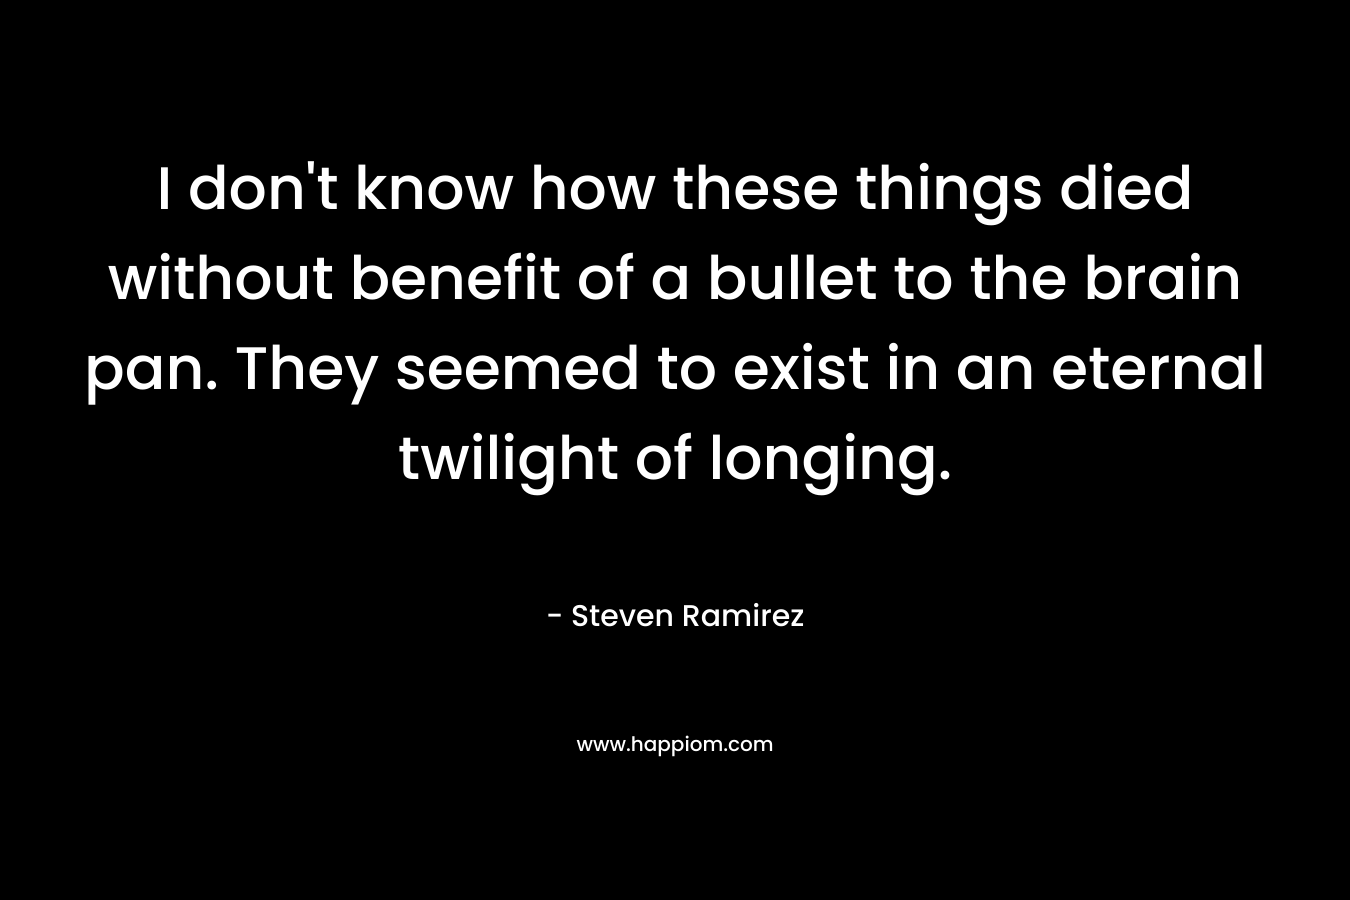 I don’t know how these things died without benefit of a bullet to the brain pan. They seemed to exist in an eternal twilight of longing. – Steven Ramirez